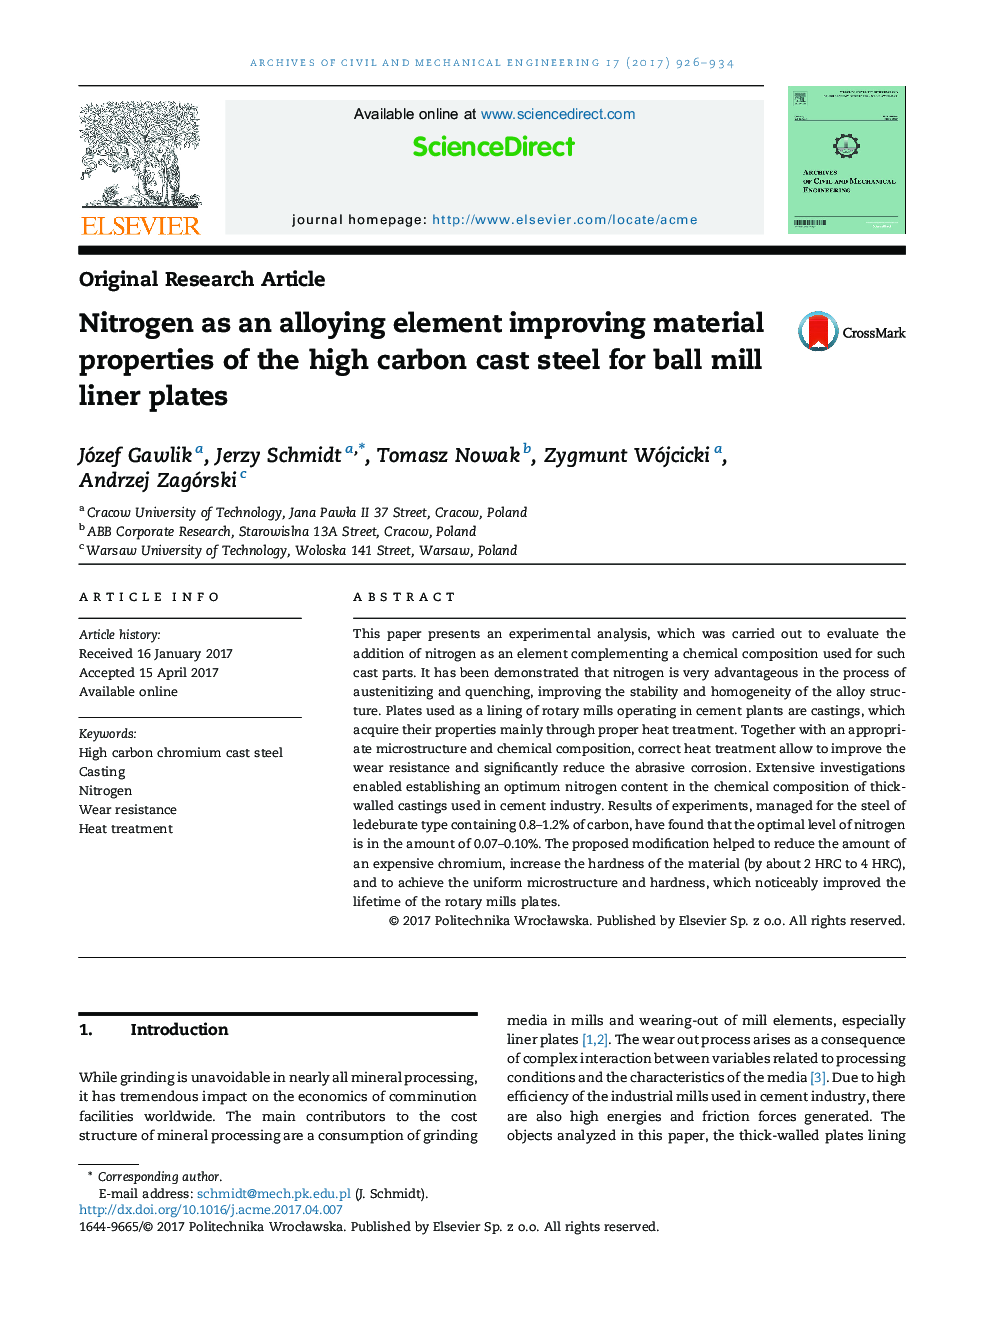 Nitrogen as an alloying element improving material properties of the high carbon cast steel for ball mill liner plates